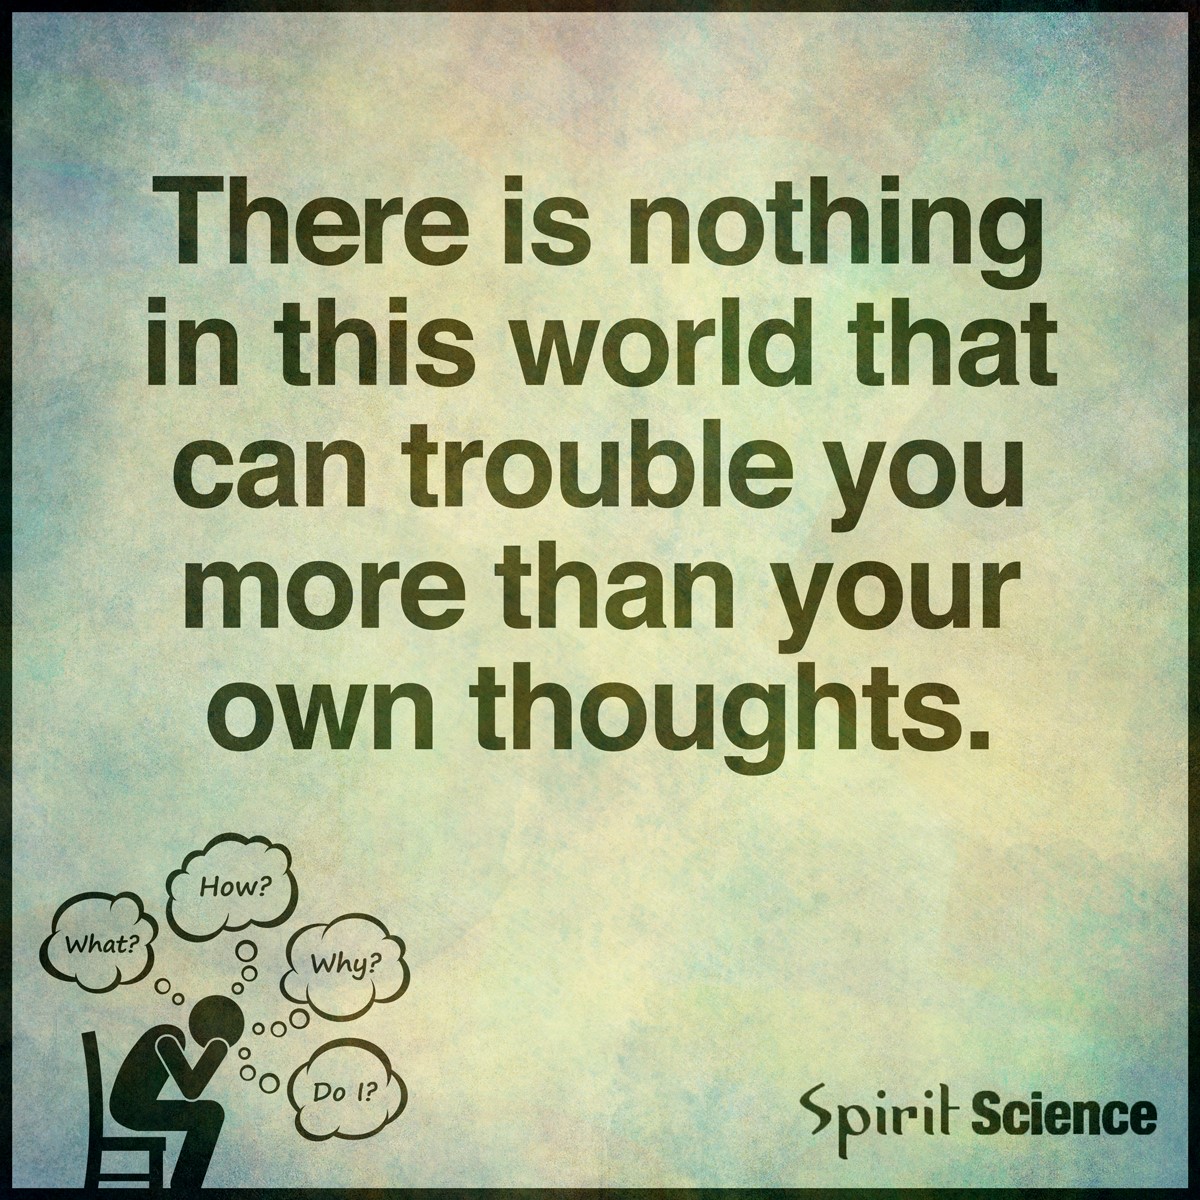 There-is-nothing-in-this-world-that-can-trouble-you-as-much-as-your-own-thoughts.-There-is-nothing-in-this-world-that-can-trouble-you-as-much-as-your-own-thoughts.